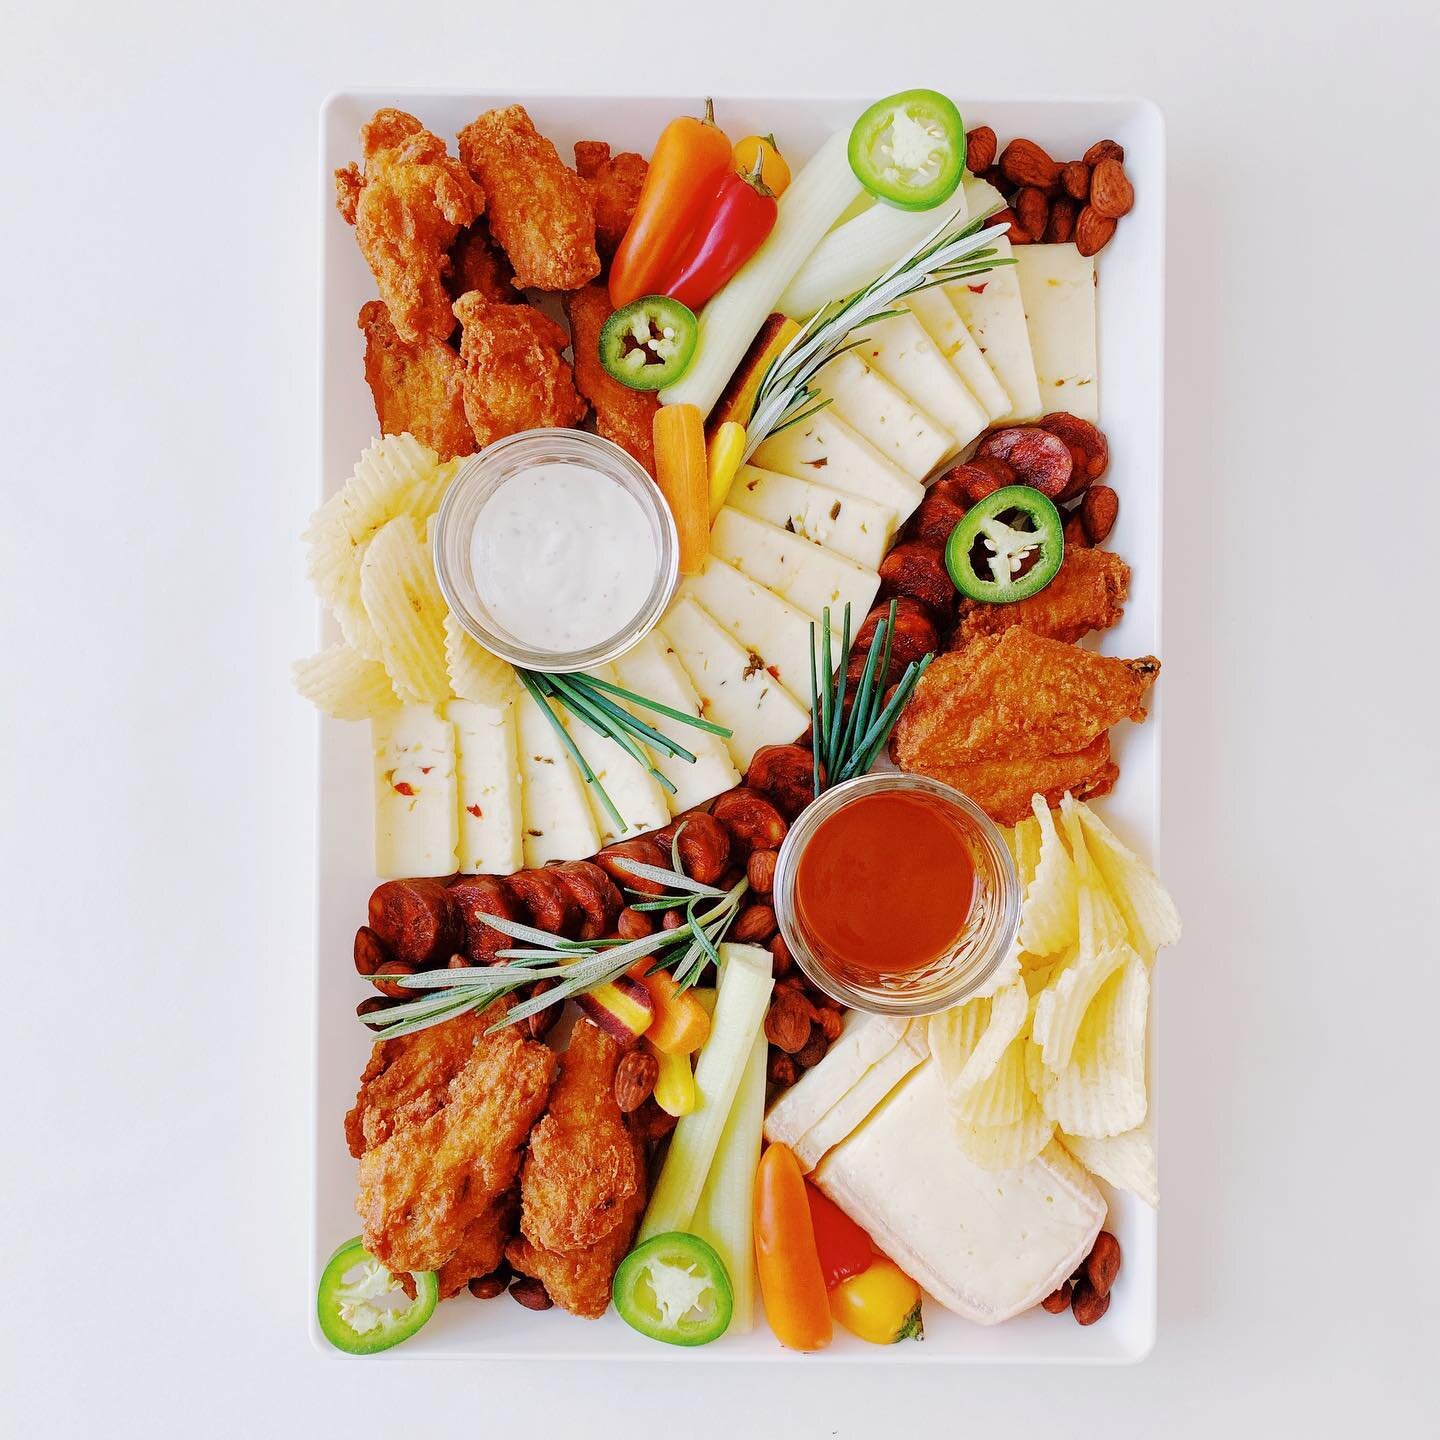 SWIPE TO BUILD ➡️ That &ldquo;Game Day&rdquo; Plate as seen on @thatcheeseplate, from page 92 of my book! Football season starts today and you know you need buffalo wings on board 🏈 Pair this with a cold, crisp beer!
⁣
1 - CHEESE: Pepperjack + Taleg